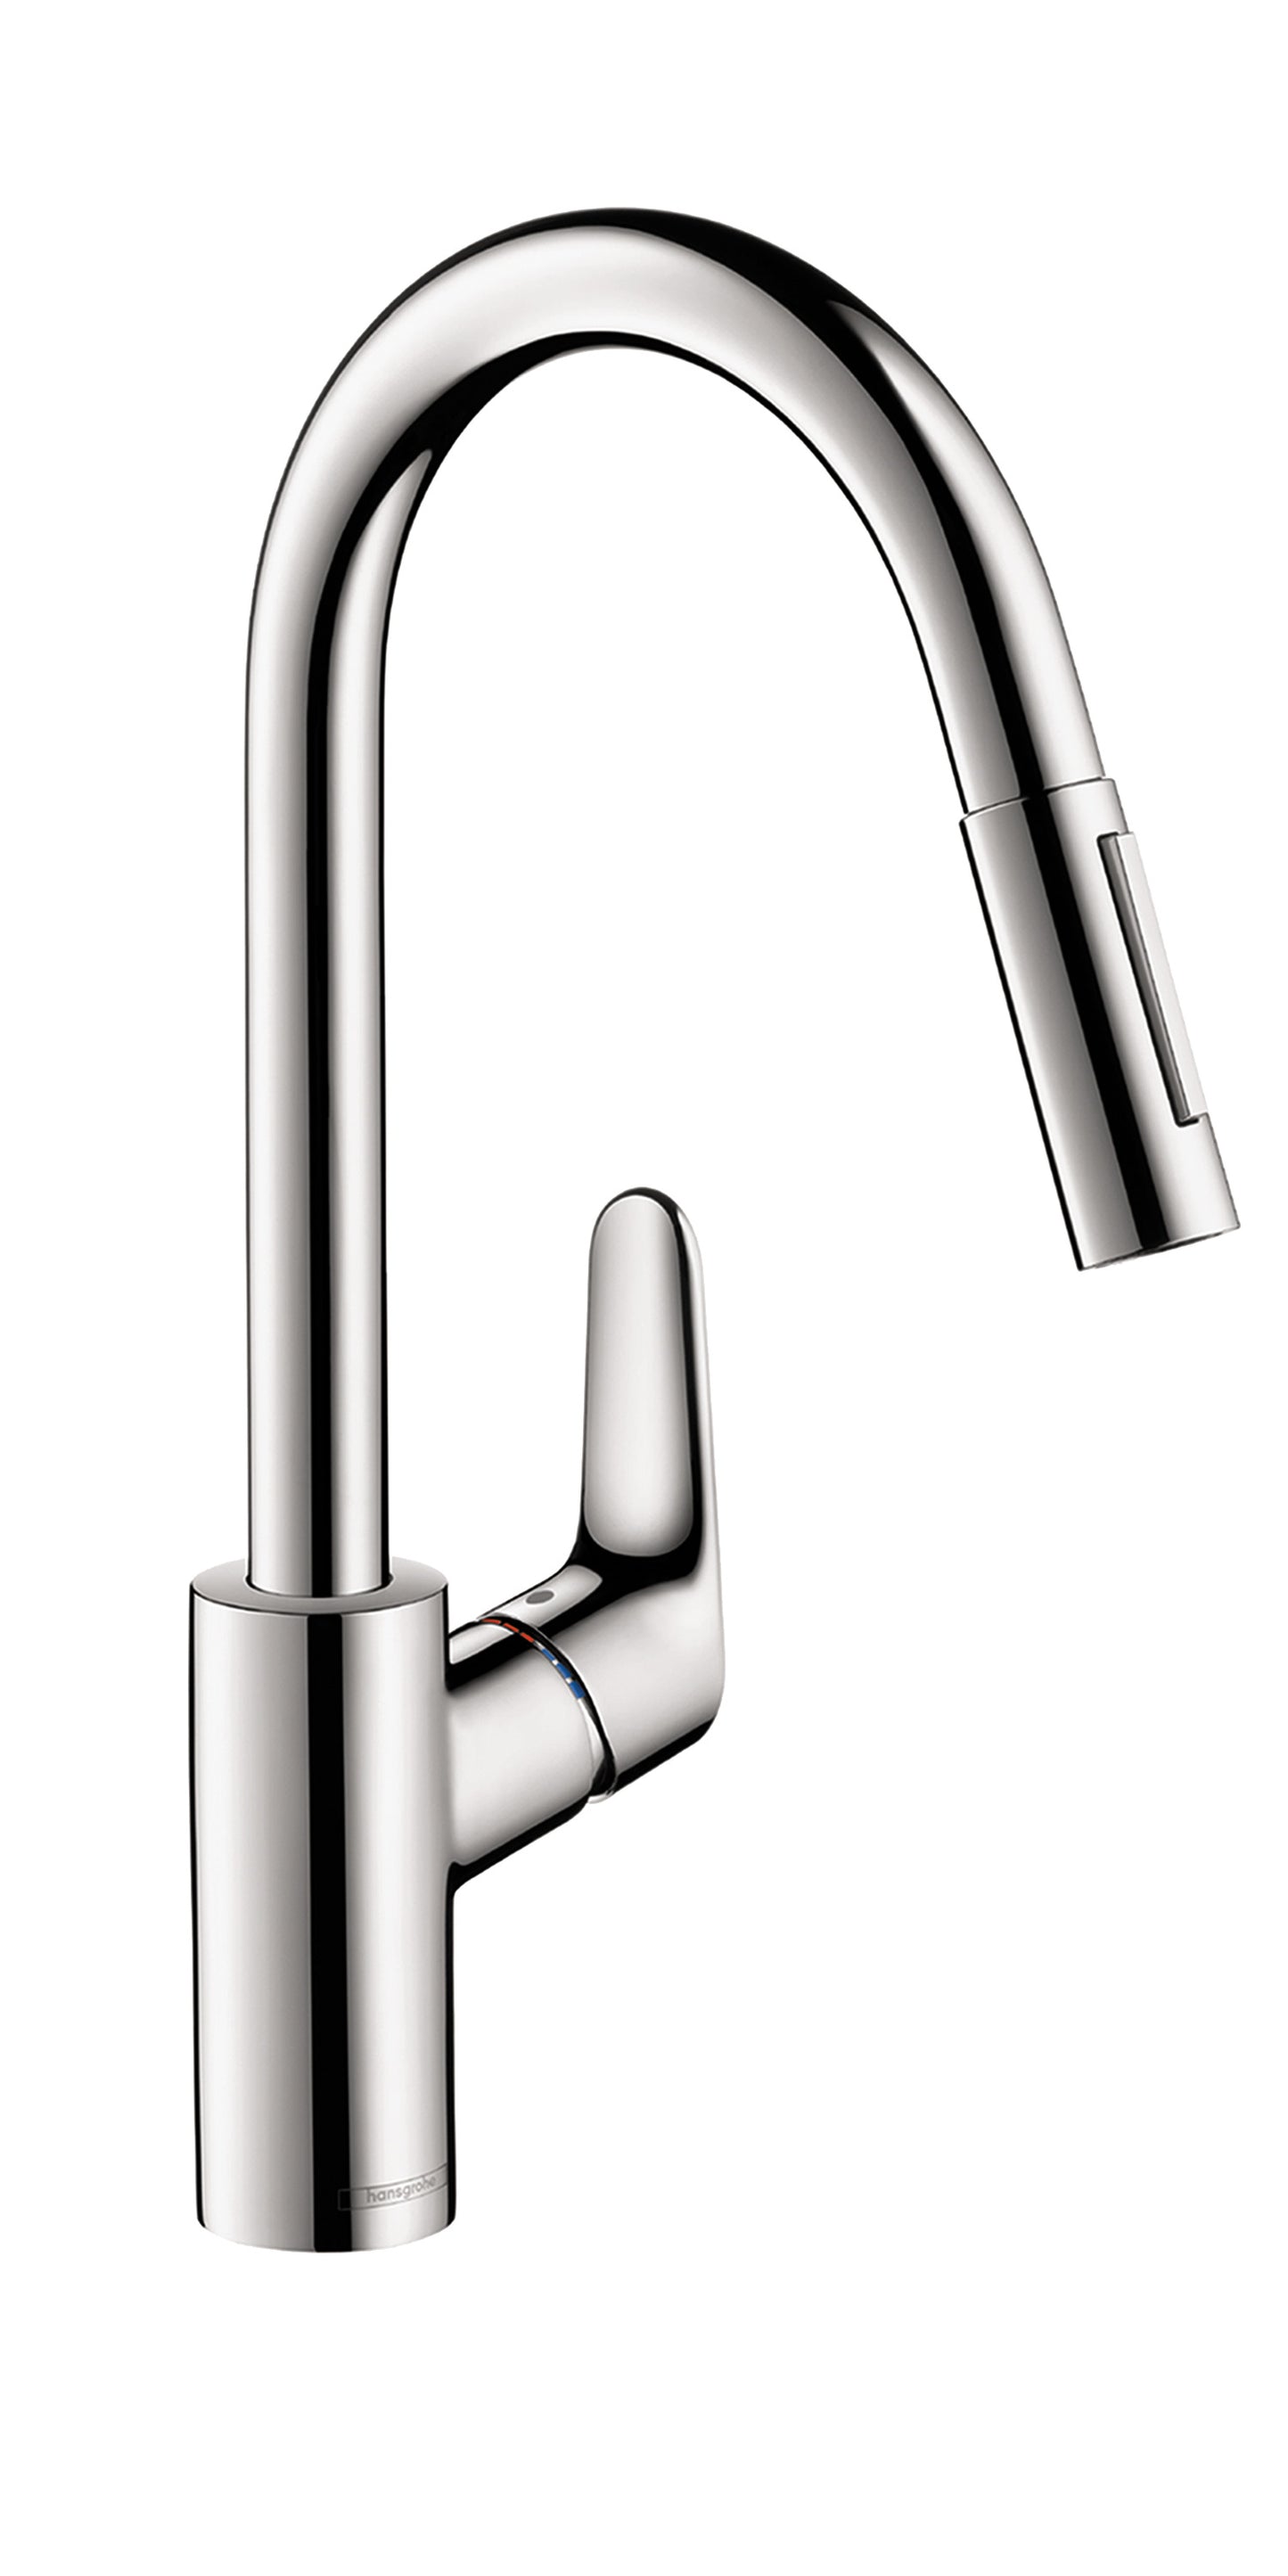 HANSGROHE 04505000 Chrome Focus Modern Kitchen Faucet 1.75 GPM